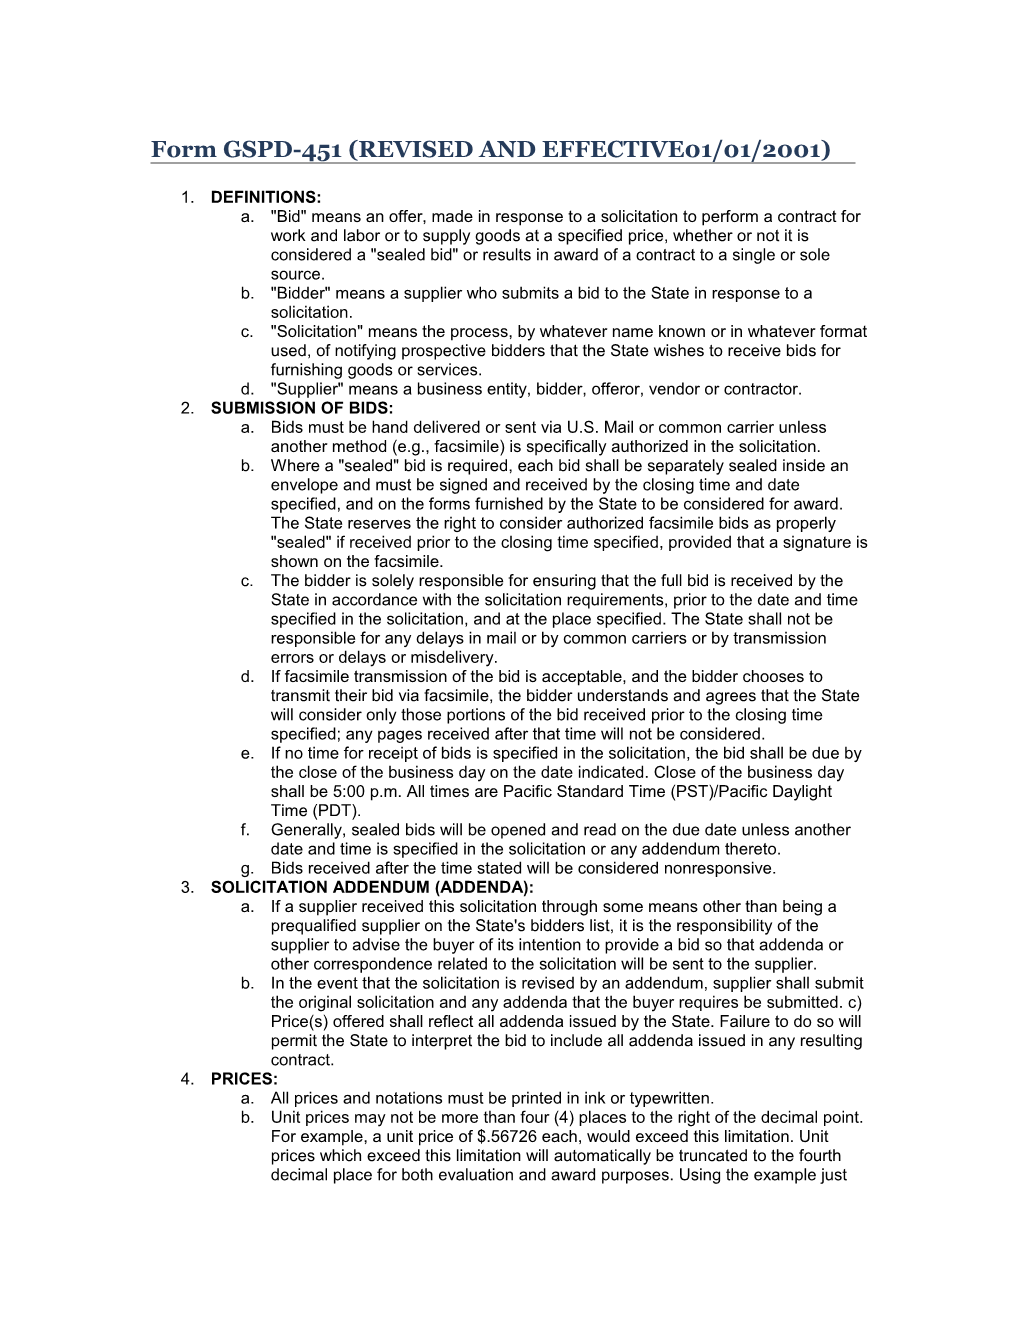 Form GSPD-451 (REVISED and EFFECTIVE01/01/2001)